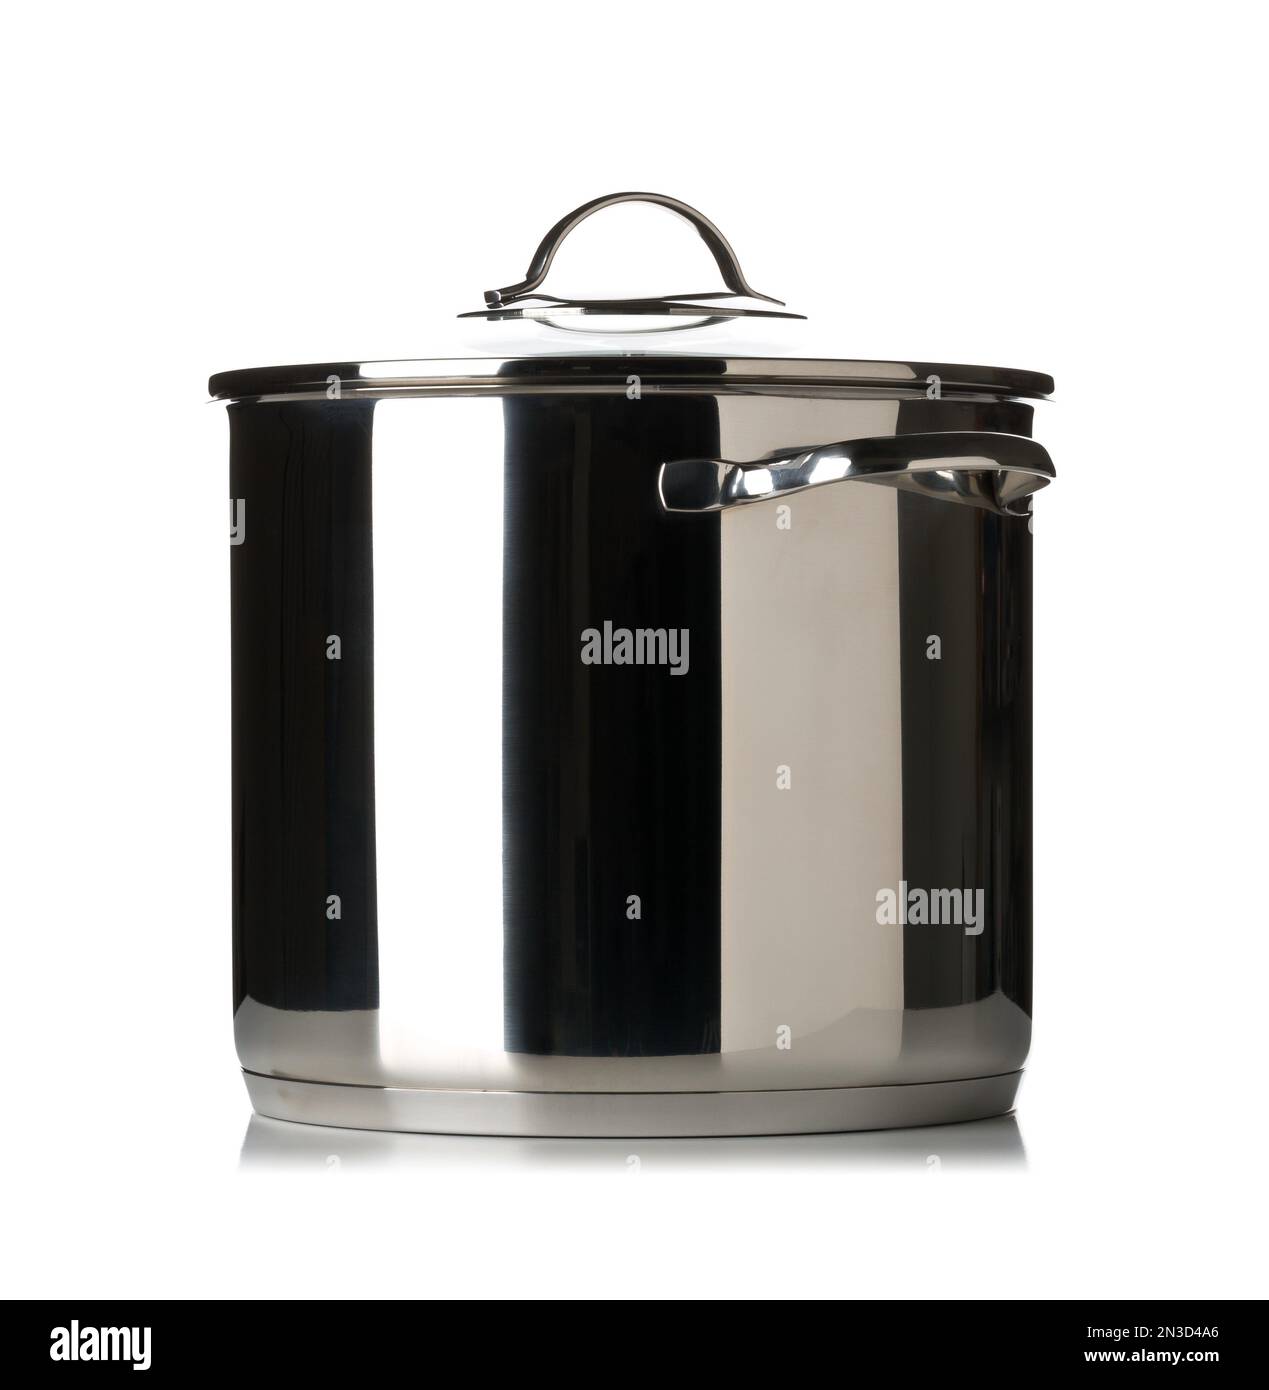 https://c8.alamy.com/comp/2N3D4A6/large-stainless-steel-cooking-pot-with-handles-and-glass-lid-side-view-over-white-background-2N3D4A6.jpg